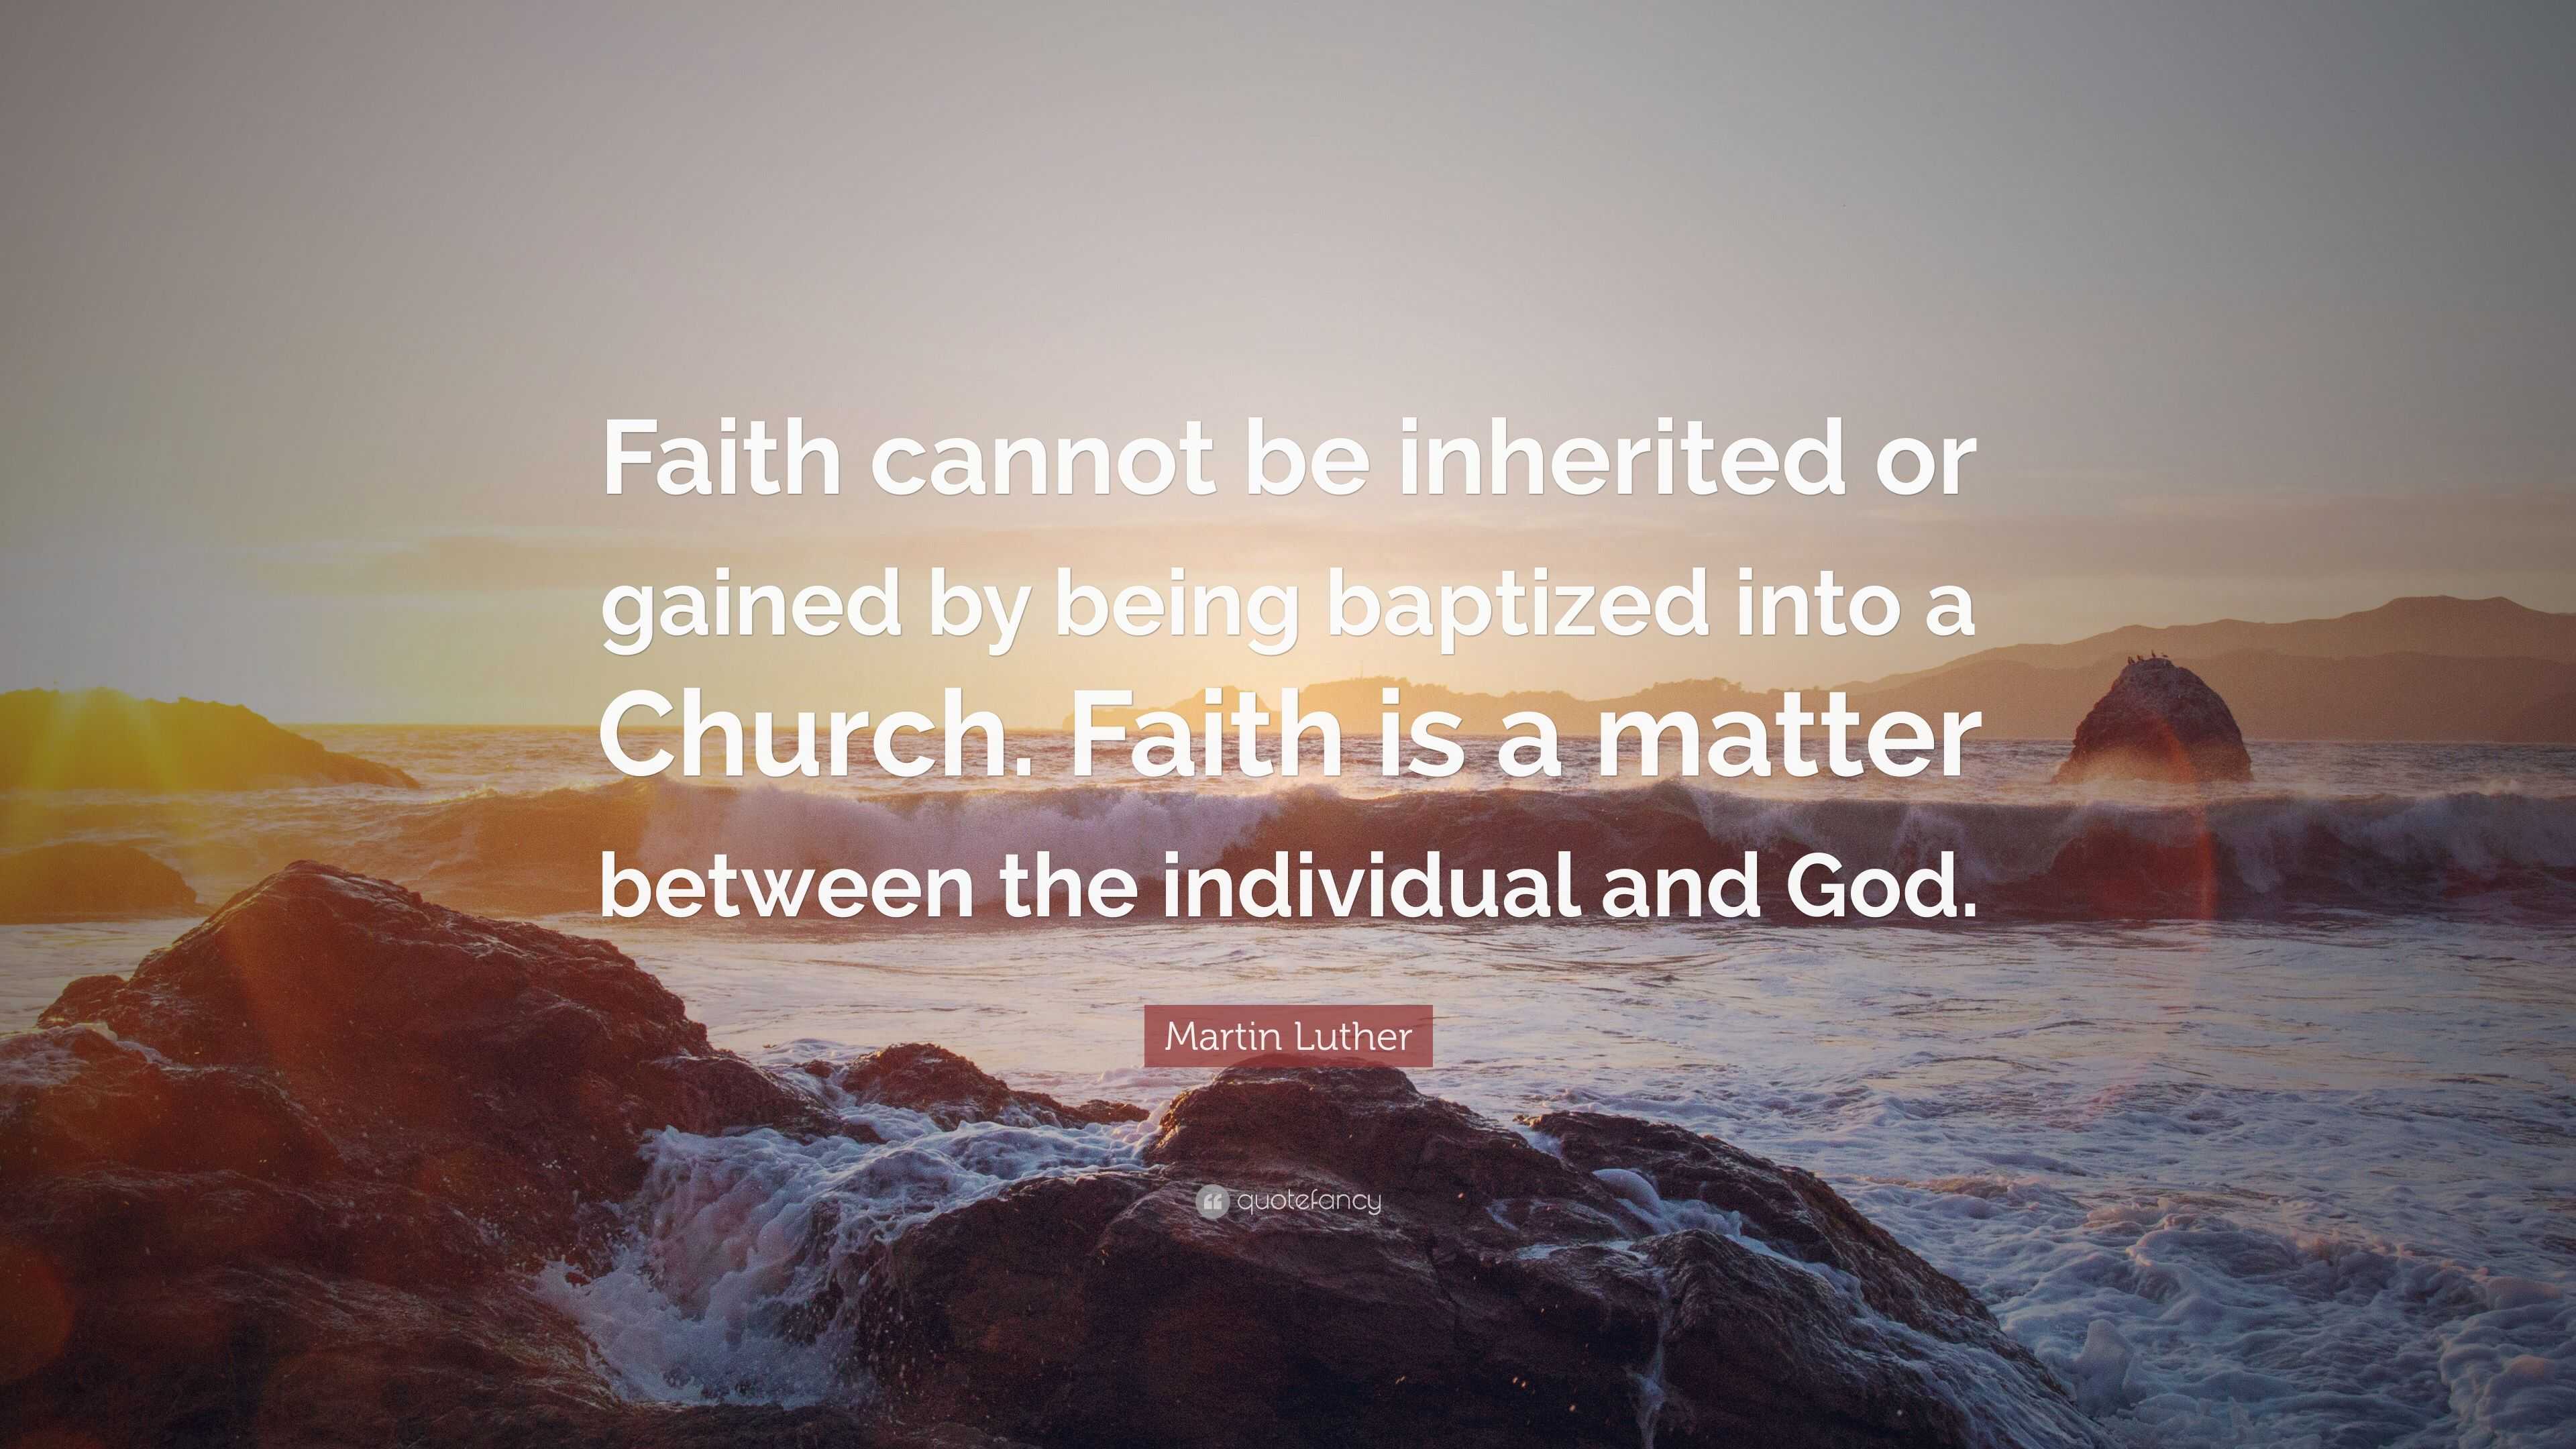 Martin Luther Quote: “Faith cannot be inherited or gained by being ...